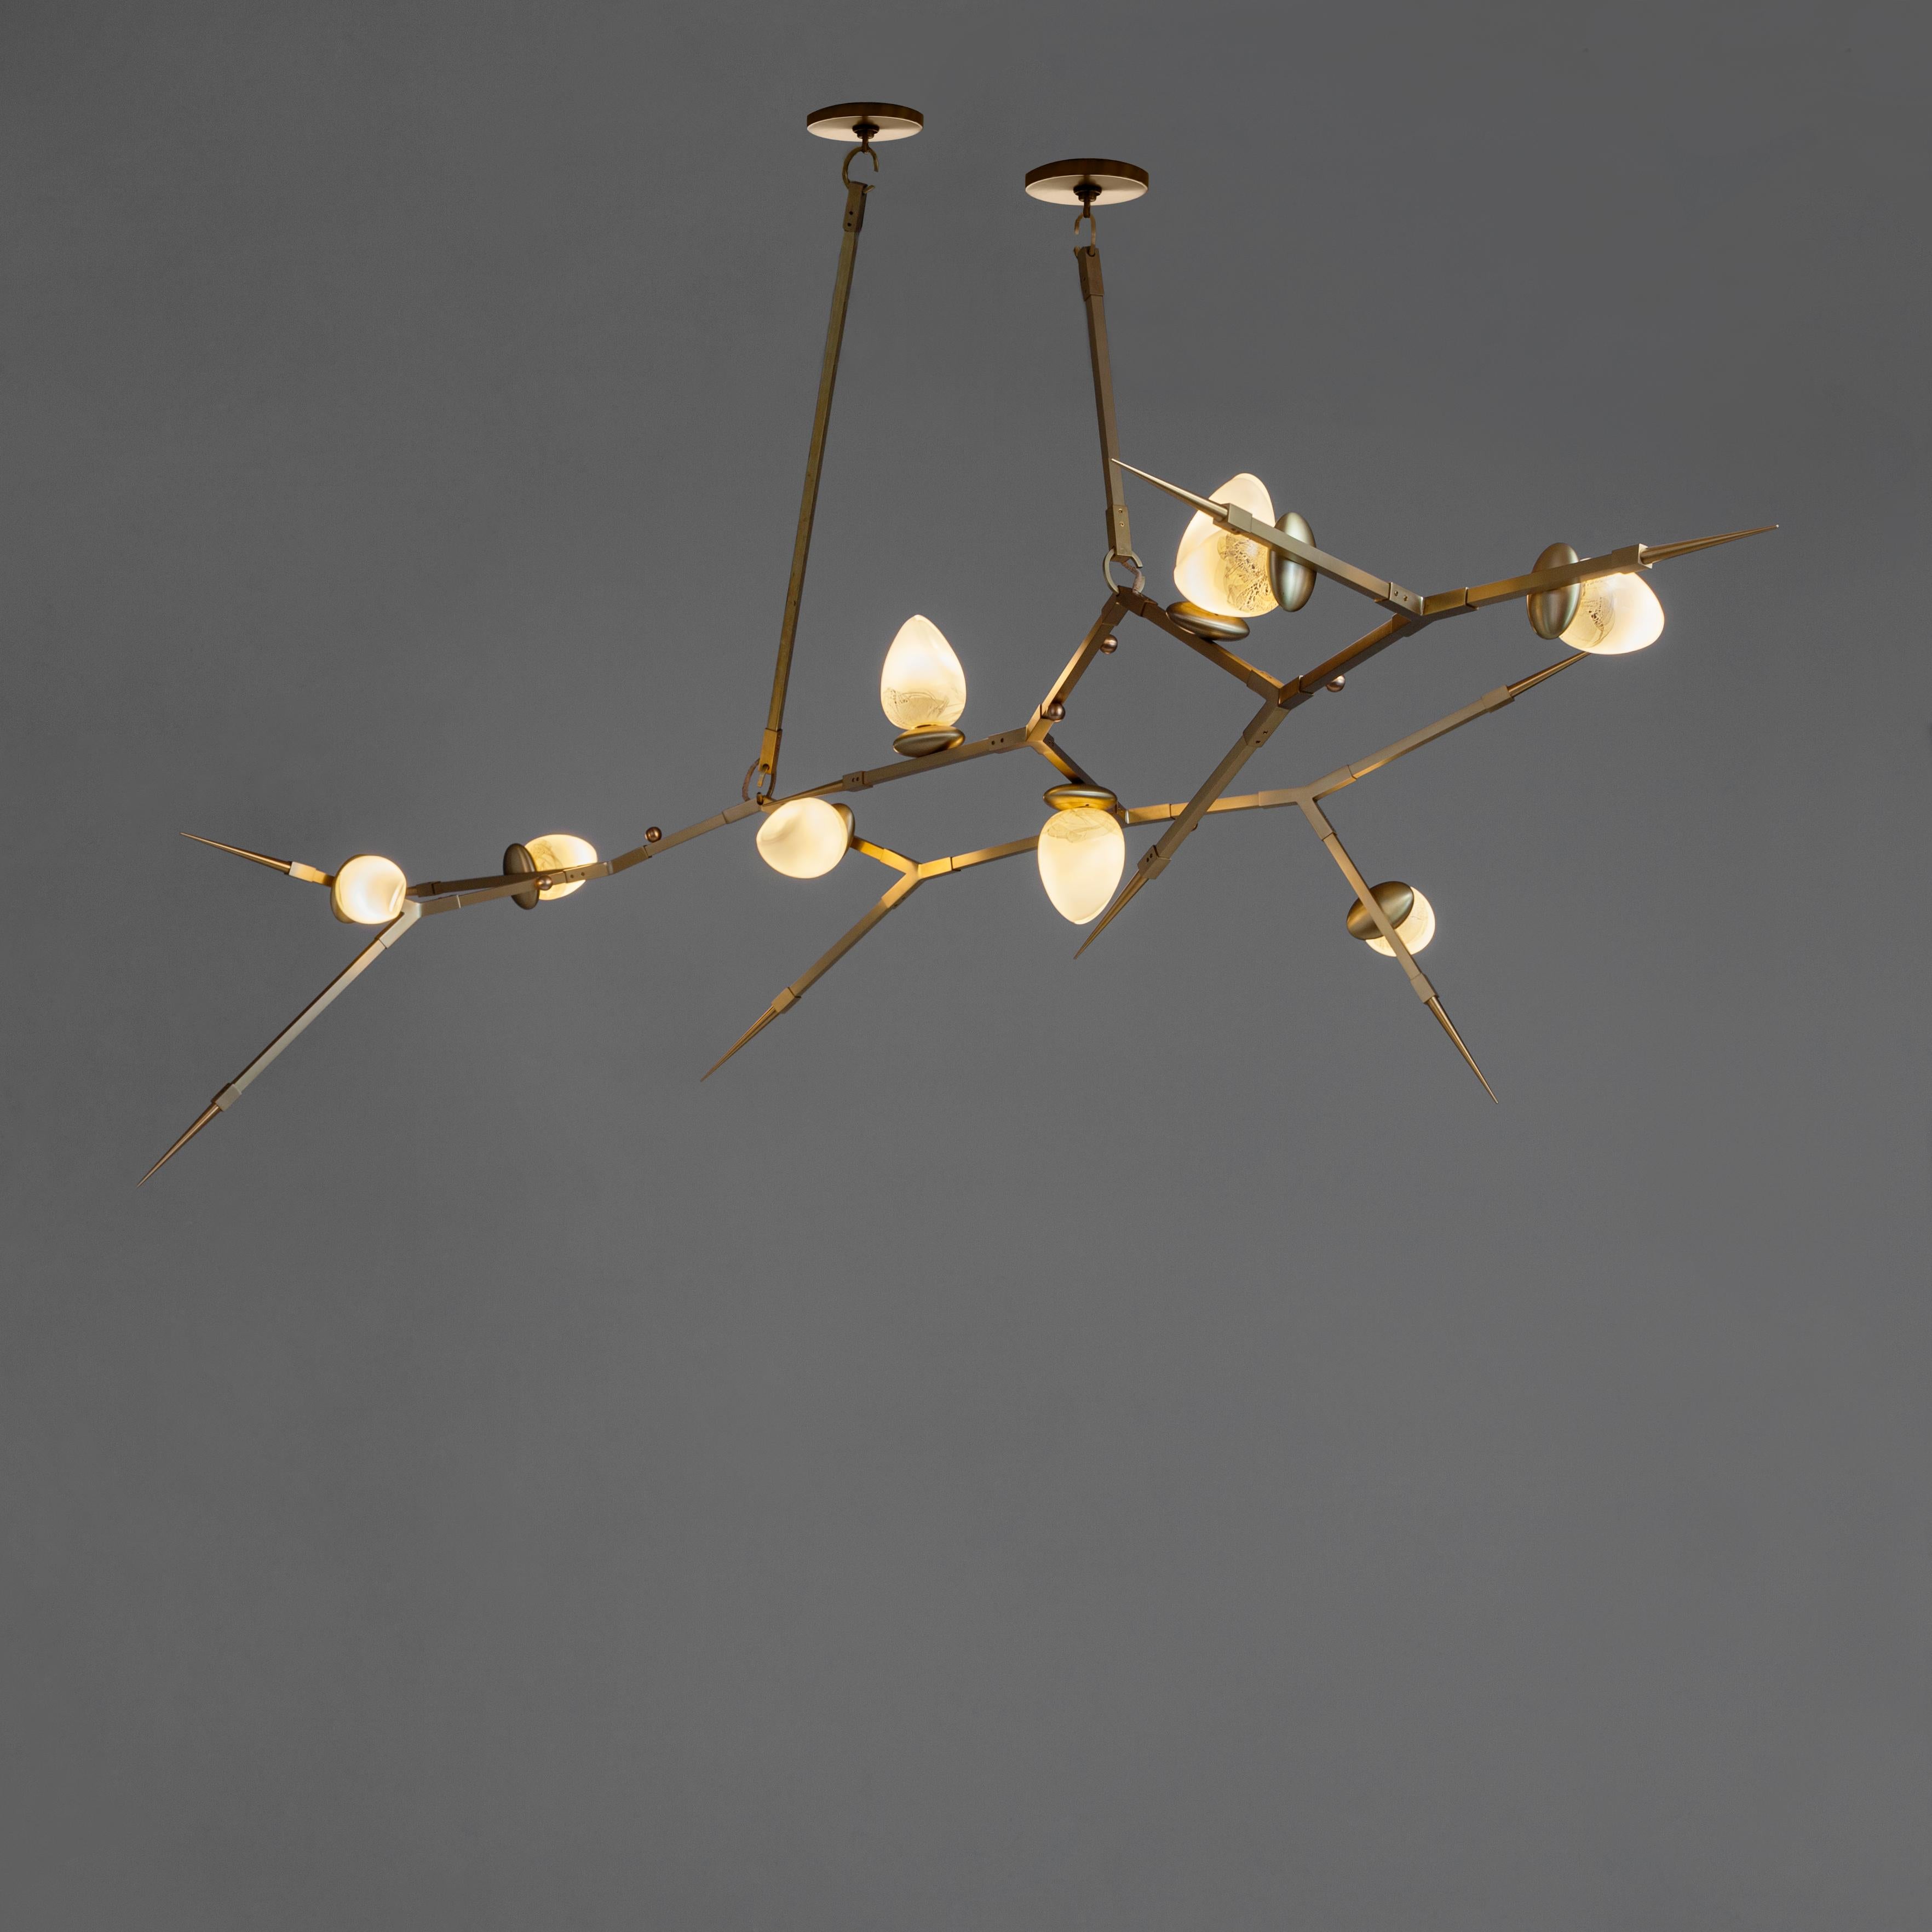 This scalable mobile chandelier, designed by Andrea Claire, uses a flexible system, shown here with (9) 4.5 watt dimmable LED bulbs. Thorn 100 chandelier can grow from 5 glass Orebs to 20, or more. We will customize this stunning fixture to fit your